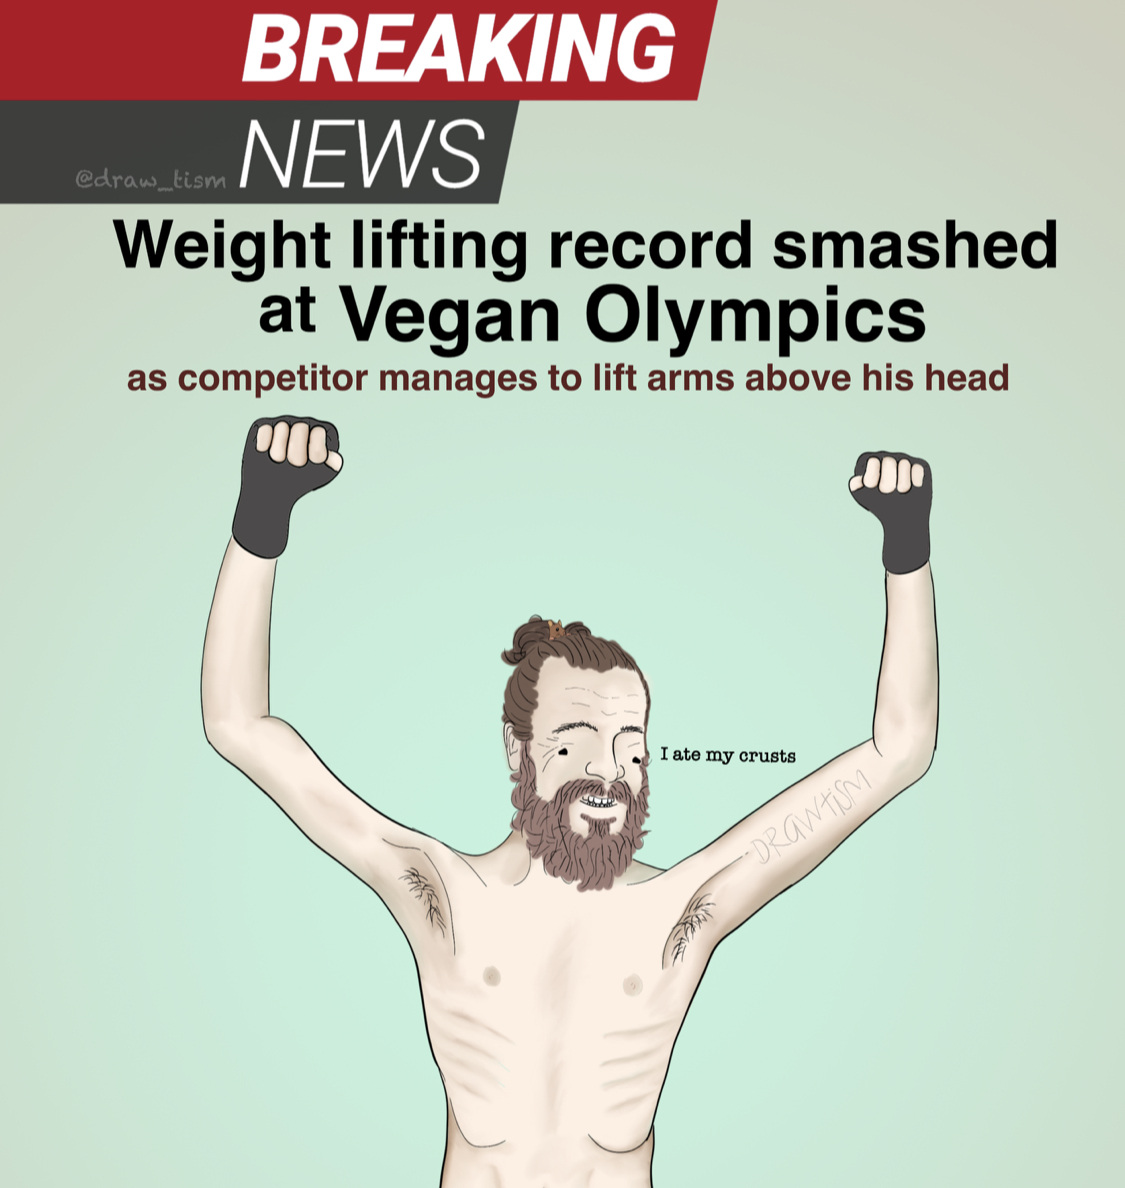 mike mcqueary - Breaking News Weight lifting record smashed at Vegan Olympics as competitor manages to lift arms above his head 0000 Inte my crusts